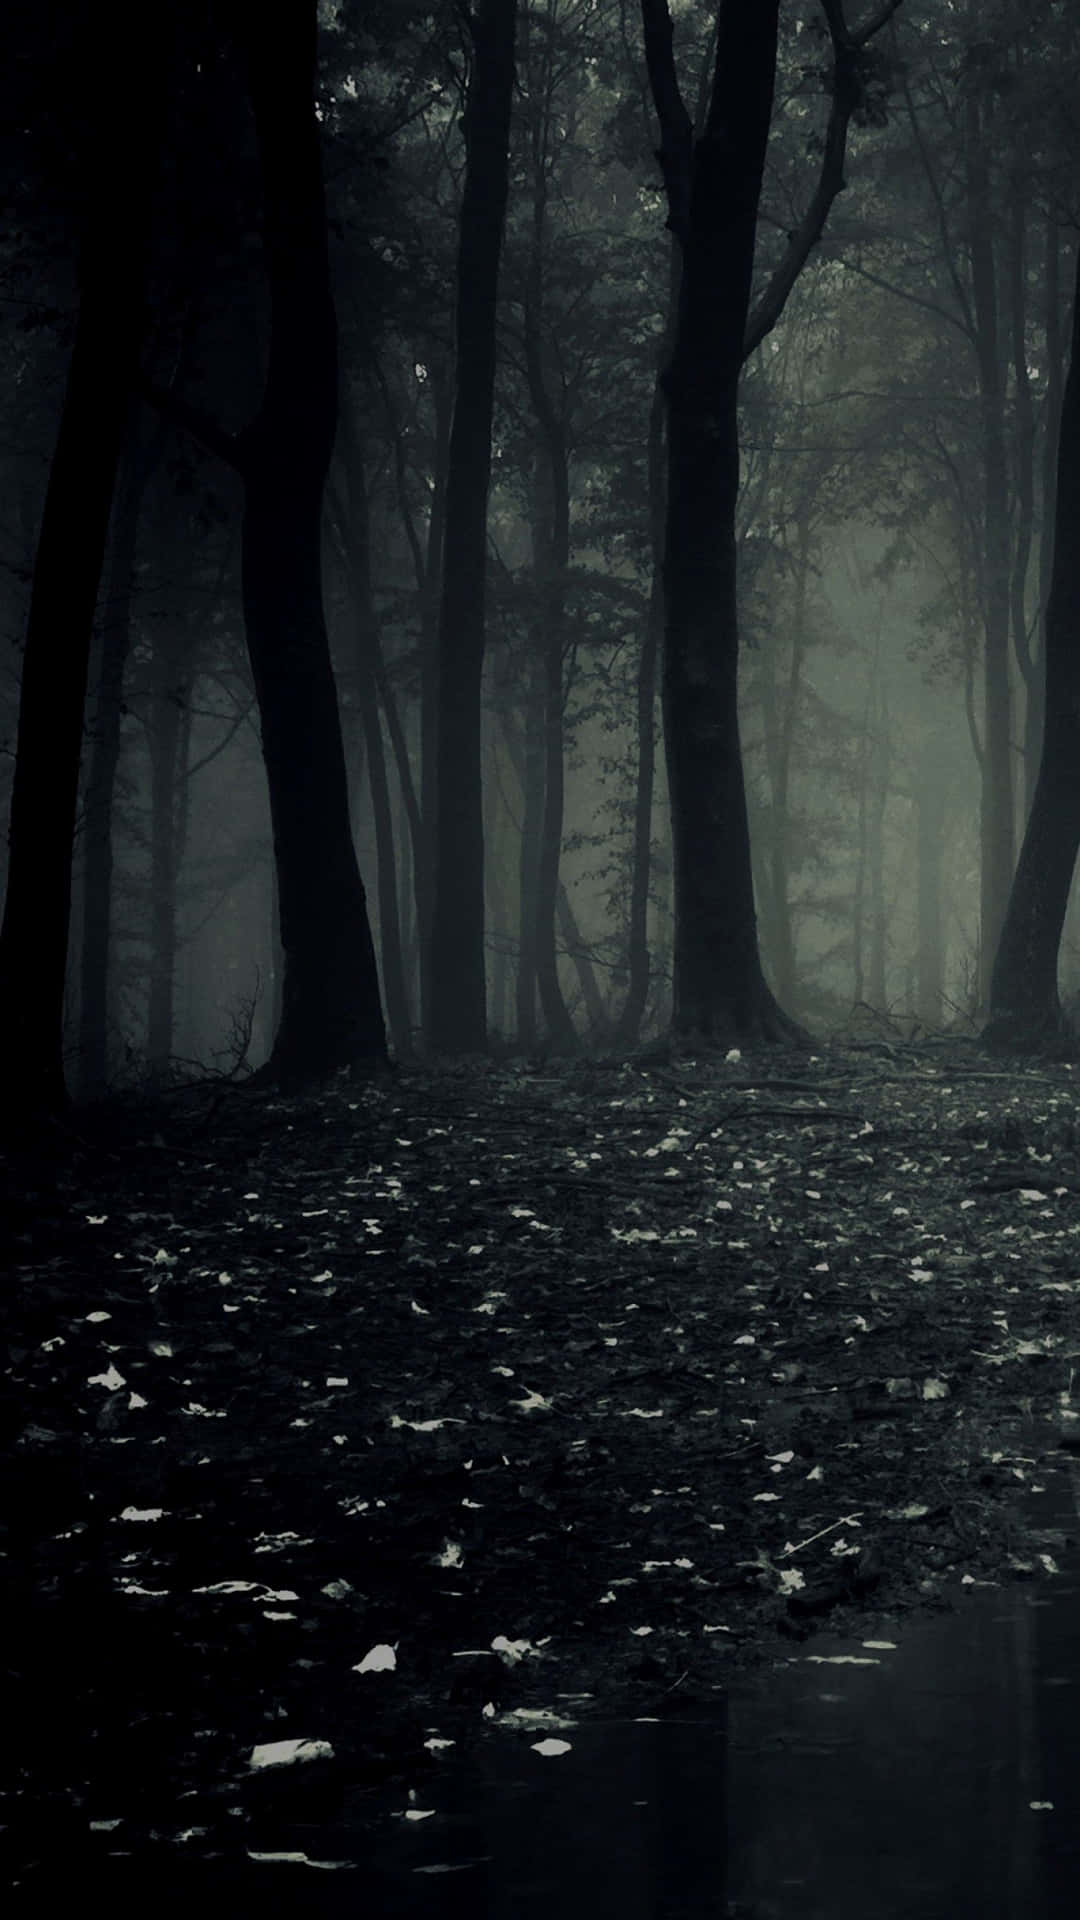 Explore the mysterious beauty of the dark forest